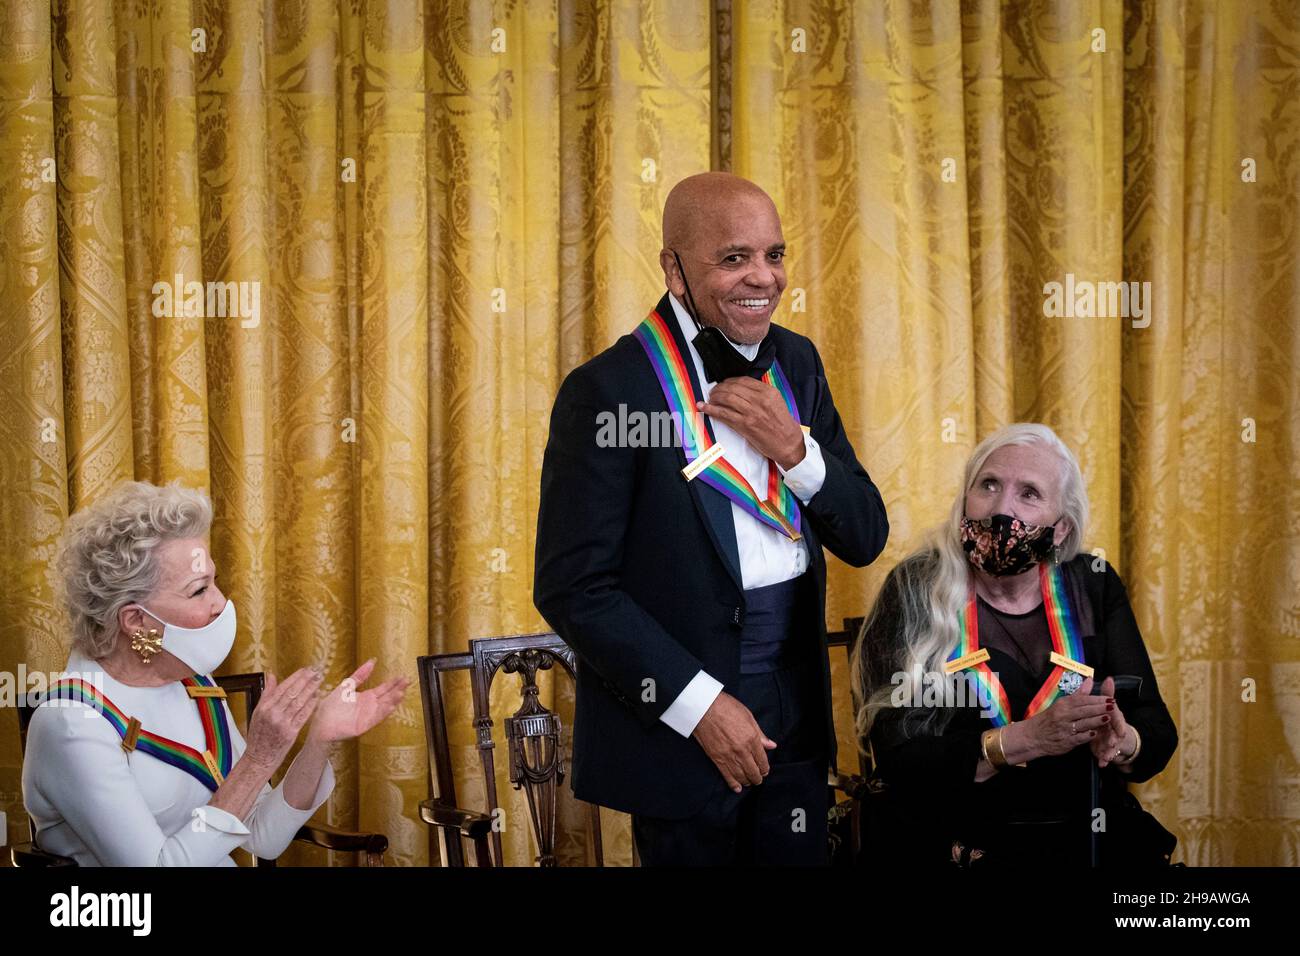 Washington, DC, U.S., on Sunday, Dec. 5, 2021. Berry Gordy, Motown founder, is recognized by U.S. President Joe Biden, not pictured, during the the Kennedy Center Honorees Reception in the East Room of the White House in Washington, DC, U.S., on Sunday, Dec. 5, 2021. The John F. Kennedy Center for the Performing Arts 44th Honorees for lifetime artistic achievements include operatic bass-baritone Justino Diaz, Motown founder Berry Gordy, Saturday Night Live creator Lorne Michaels, actress Bette Midler, and singer-songwriter Joni Mitchell. Credit: Al Drago/Pool via CNP /MediaPunch Stock Photo